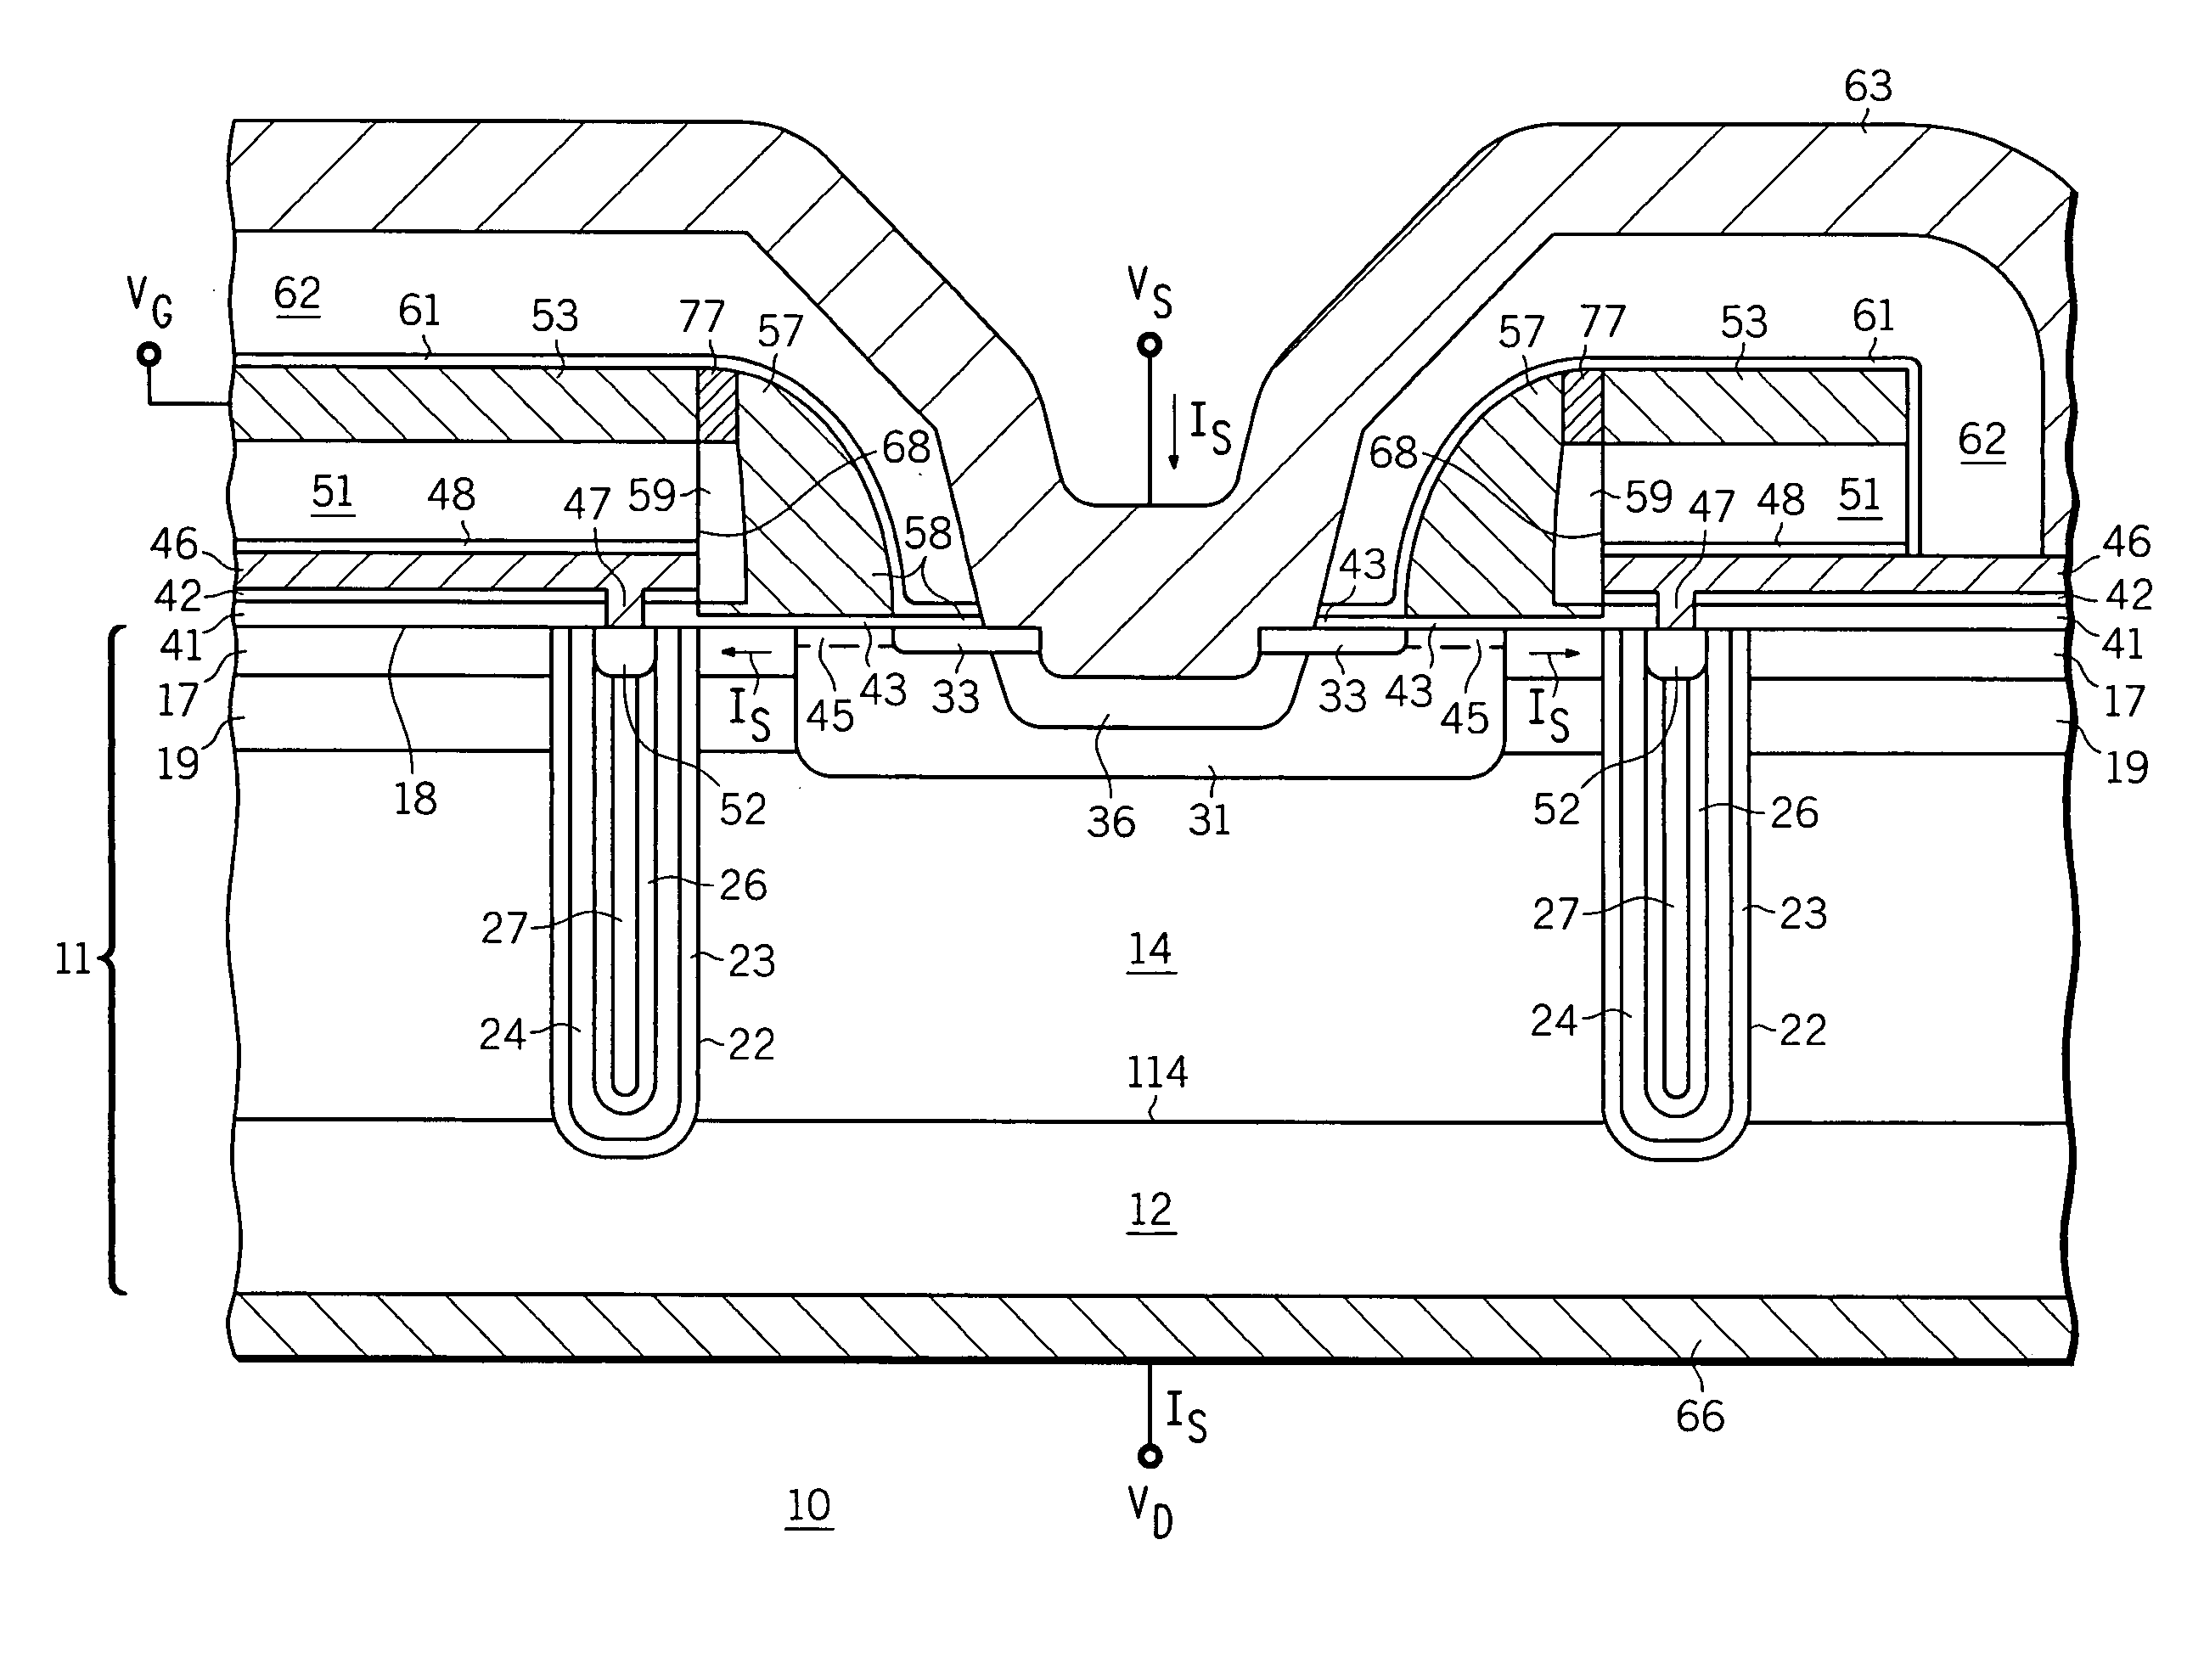 Superjunction semiconductor device structure